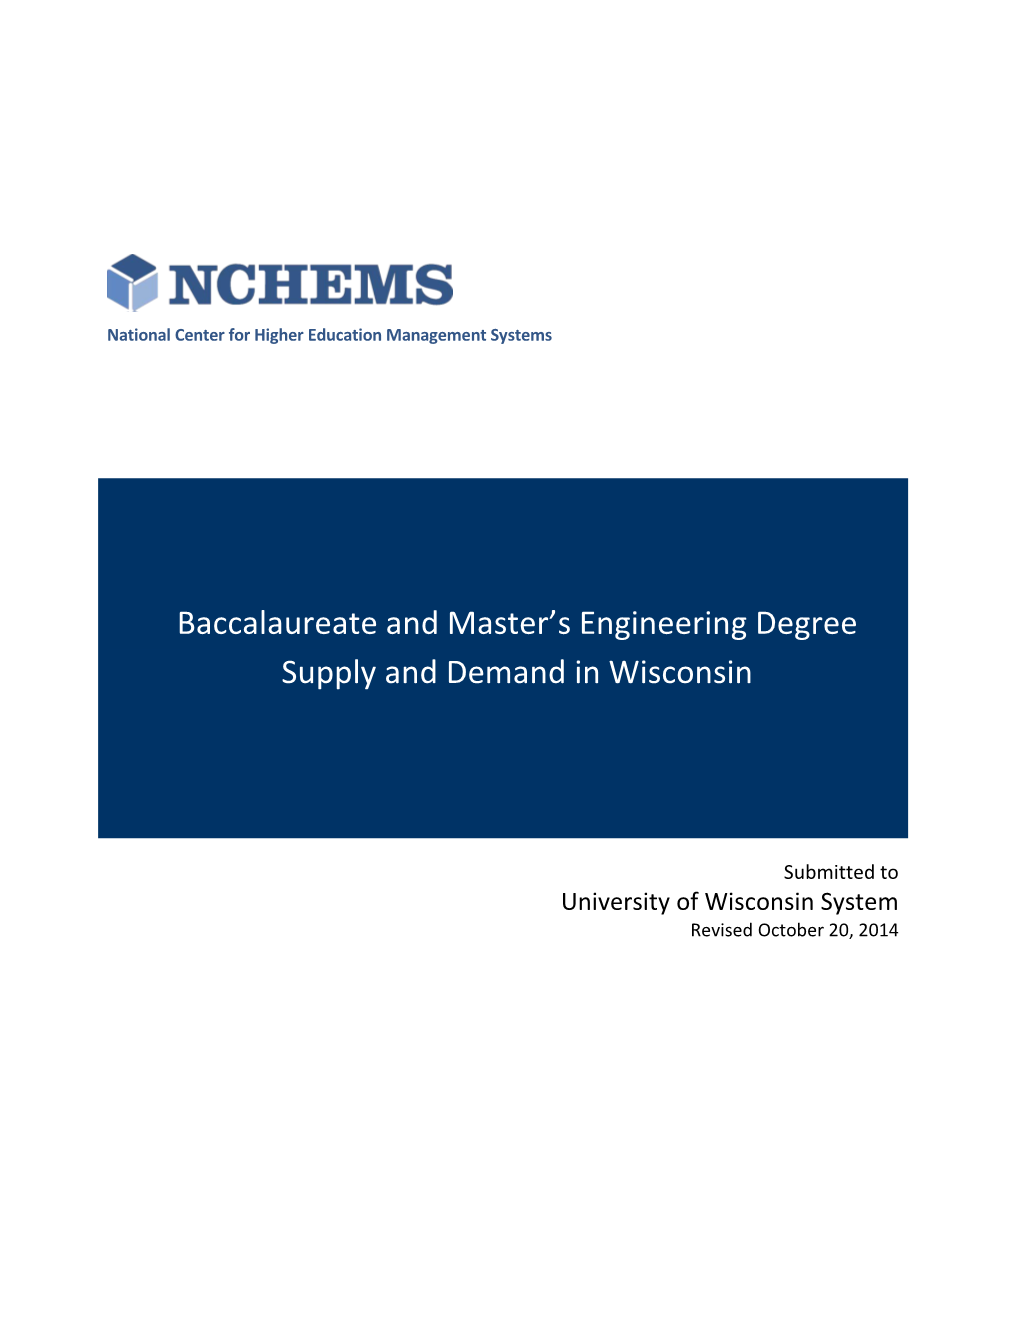 Baccalaureate and Master's Engineering Degree Supply And